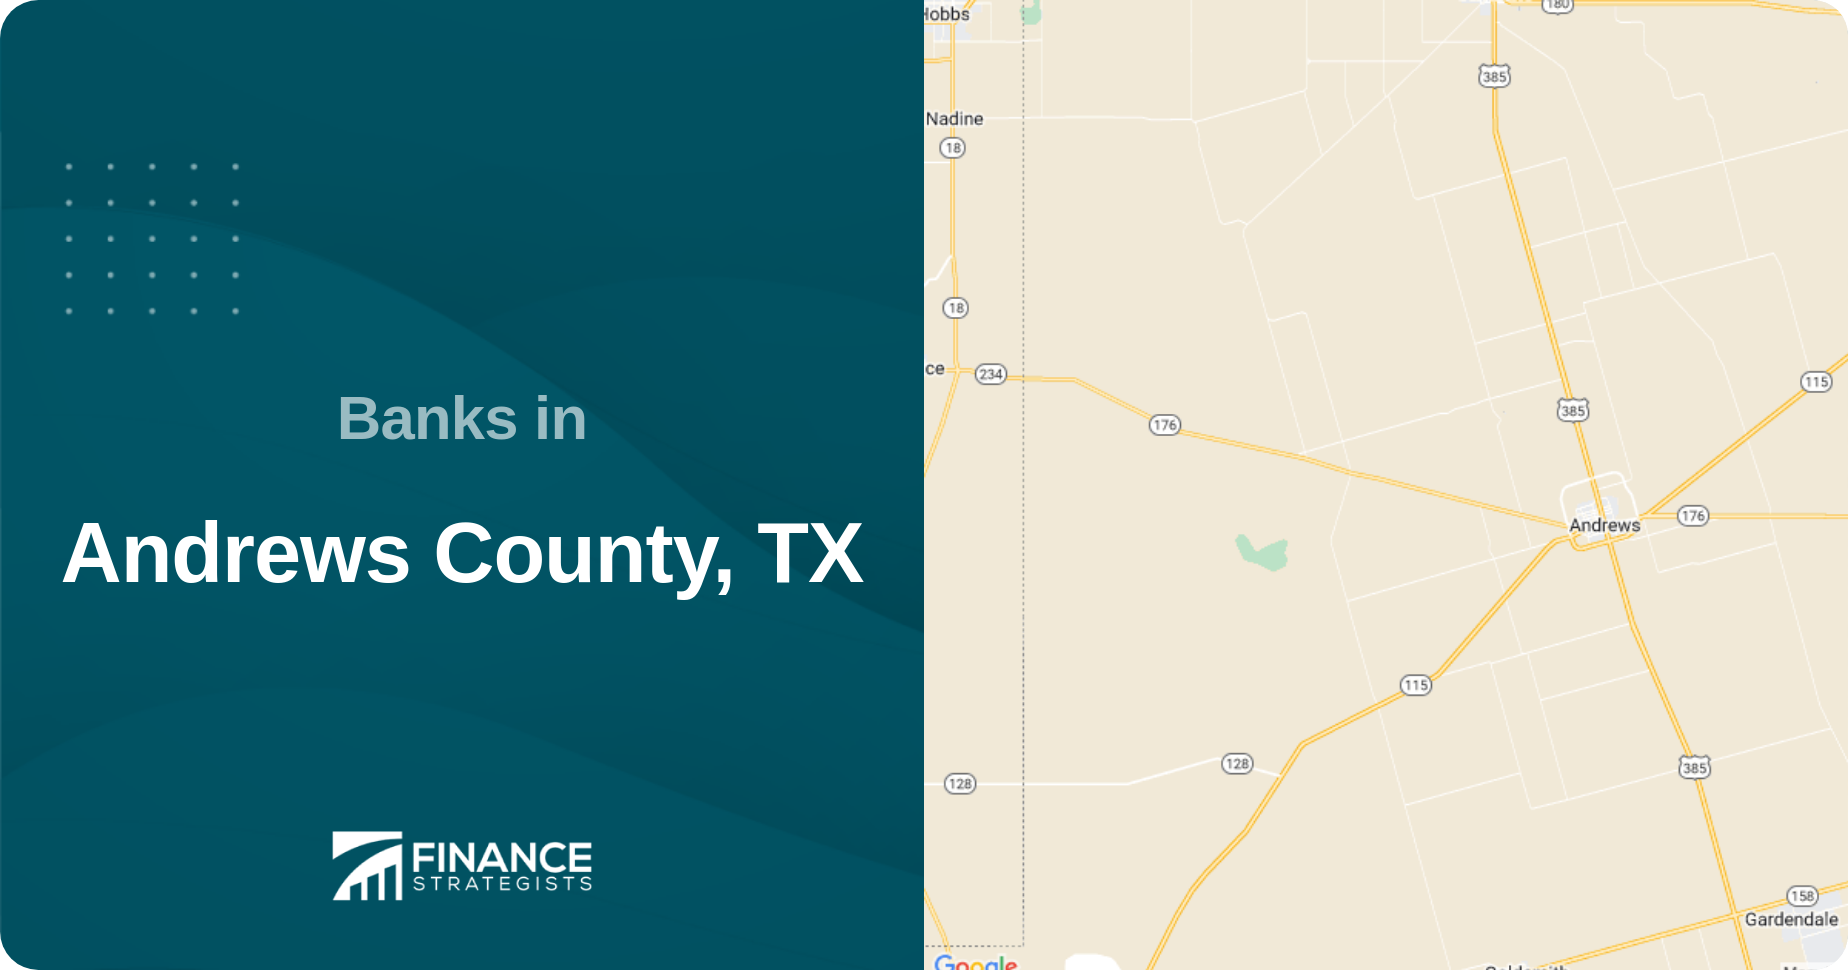 Banks in Andrews County, TX